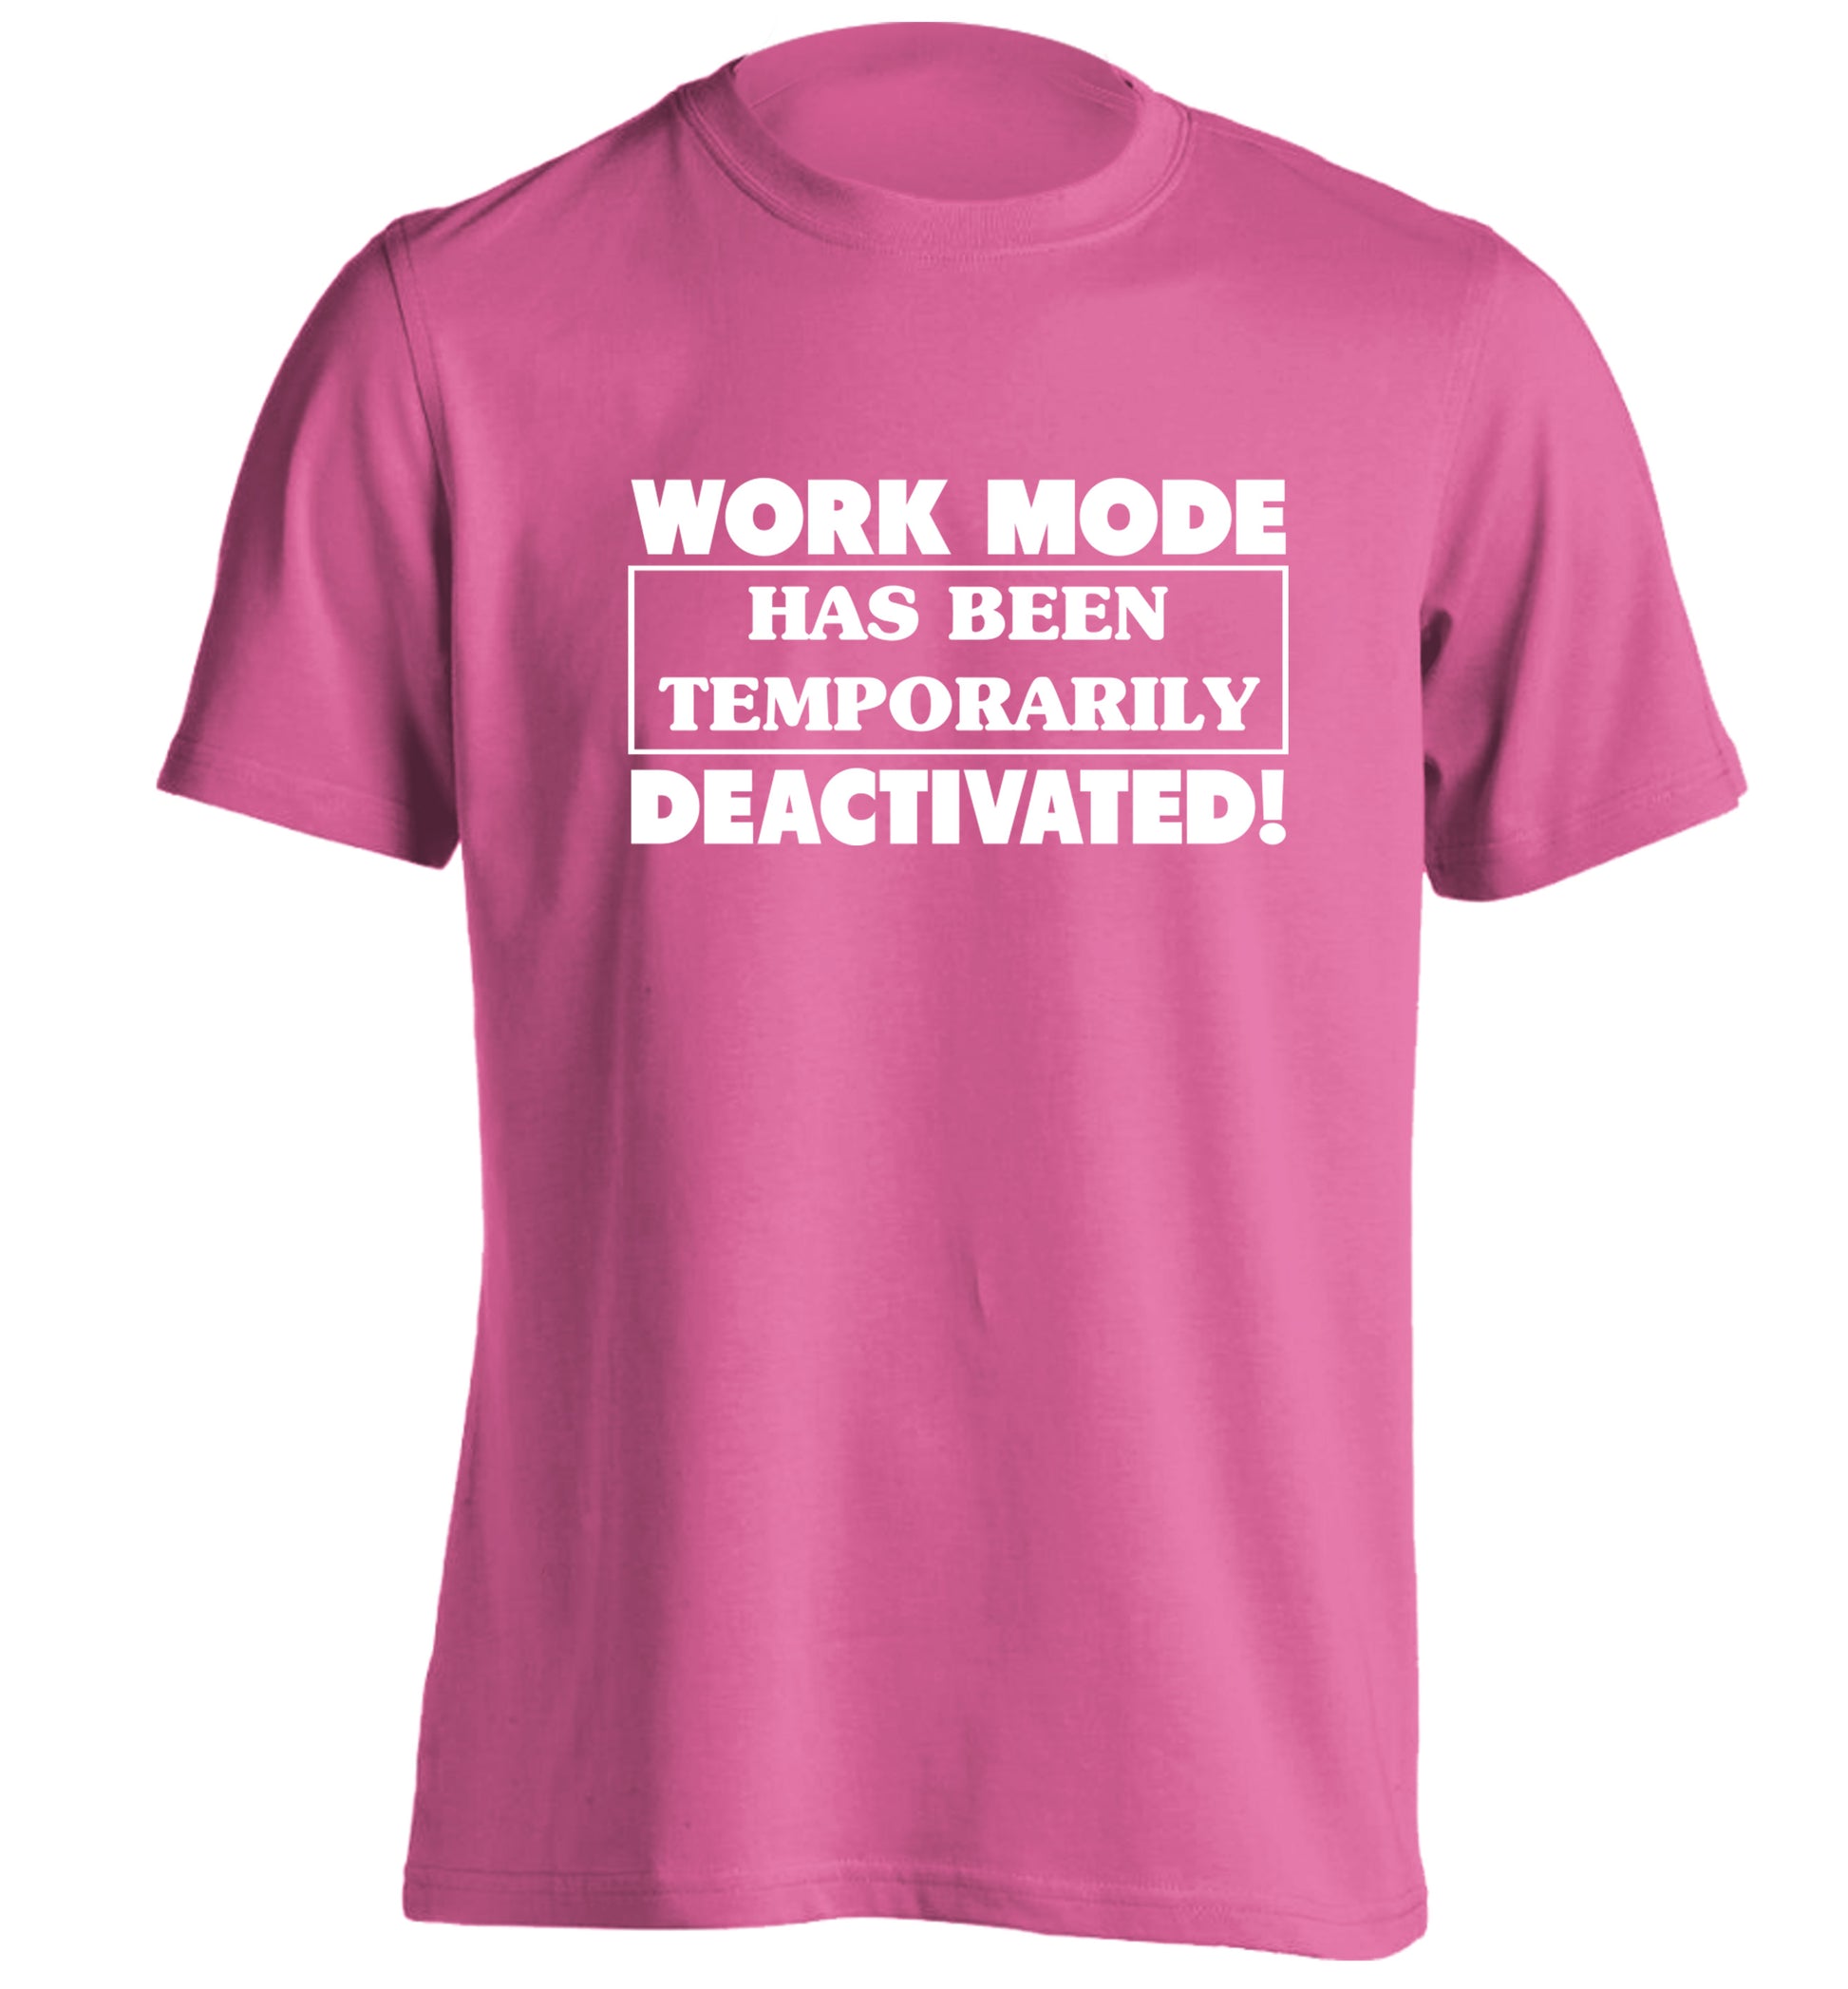 Work mode has now been temporarily deactivated adults unisex pink Tshirt 2XL